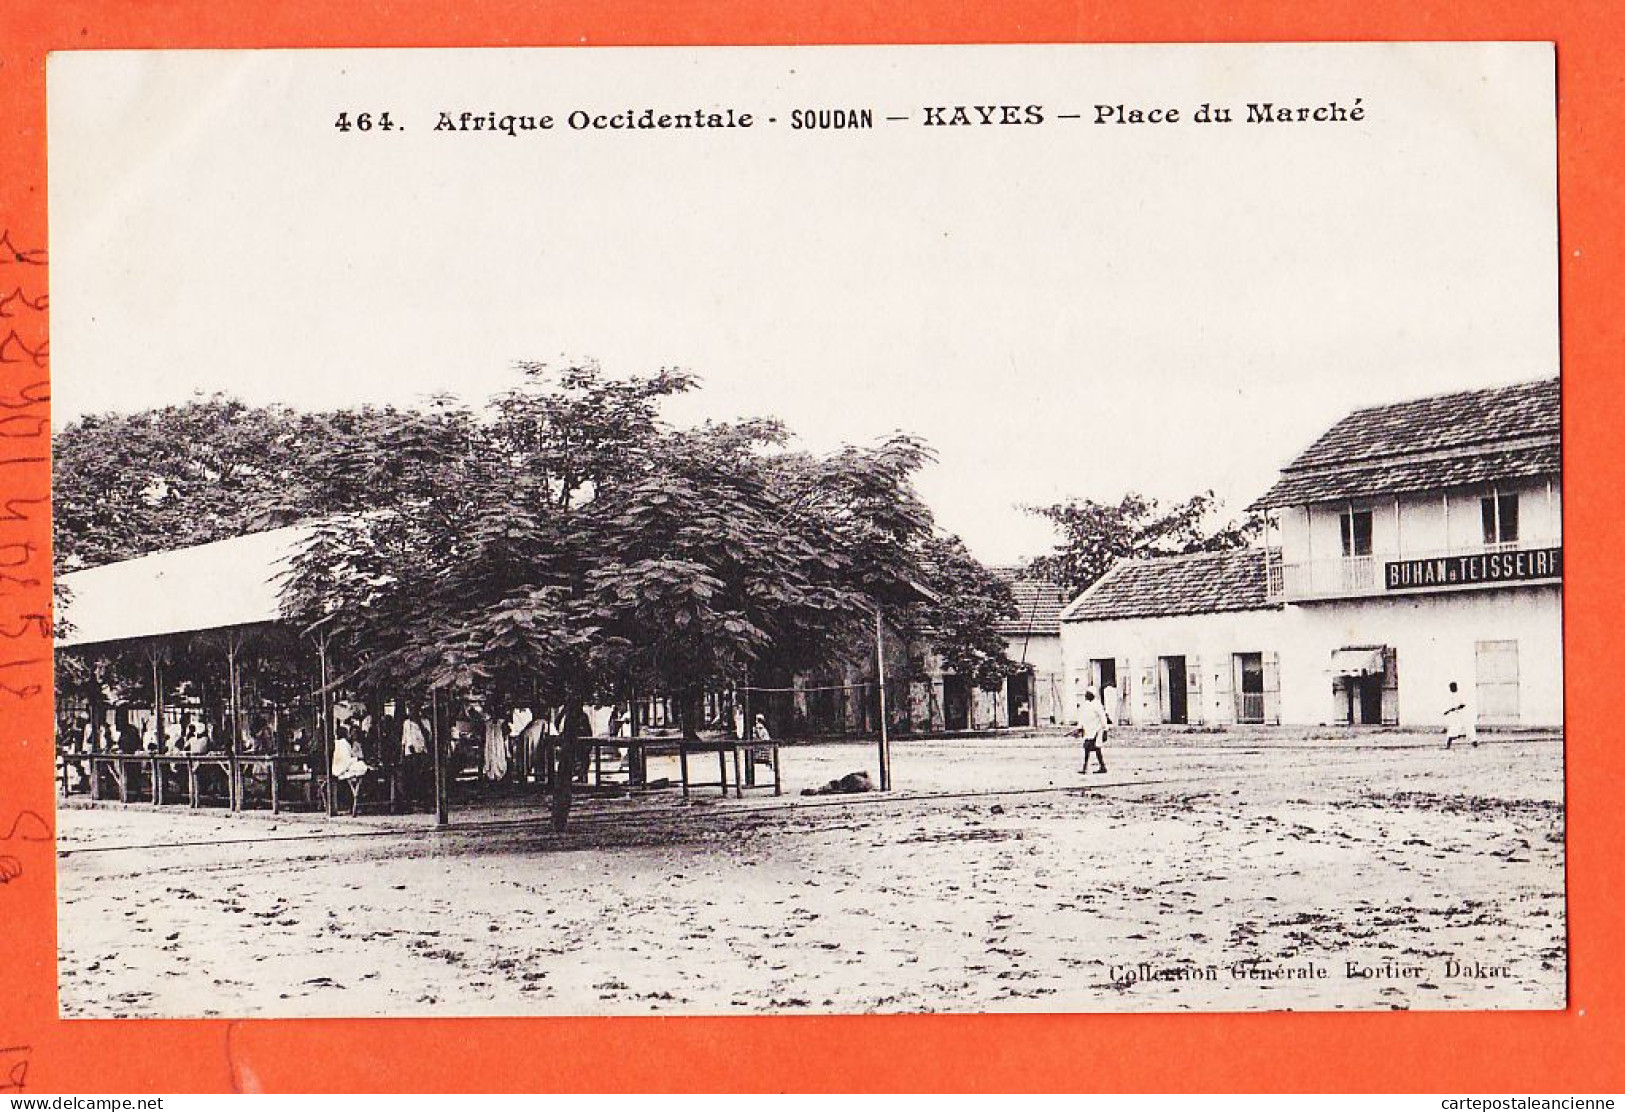 32974 / ♥️ KAYES Soudan (•◡•) BUHAN-TEISSEIRE Place Marché ◉ Collection Generale FORTIER Dakar 464 Afrique Occidentale - Sudán